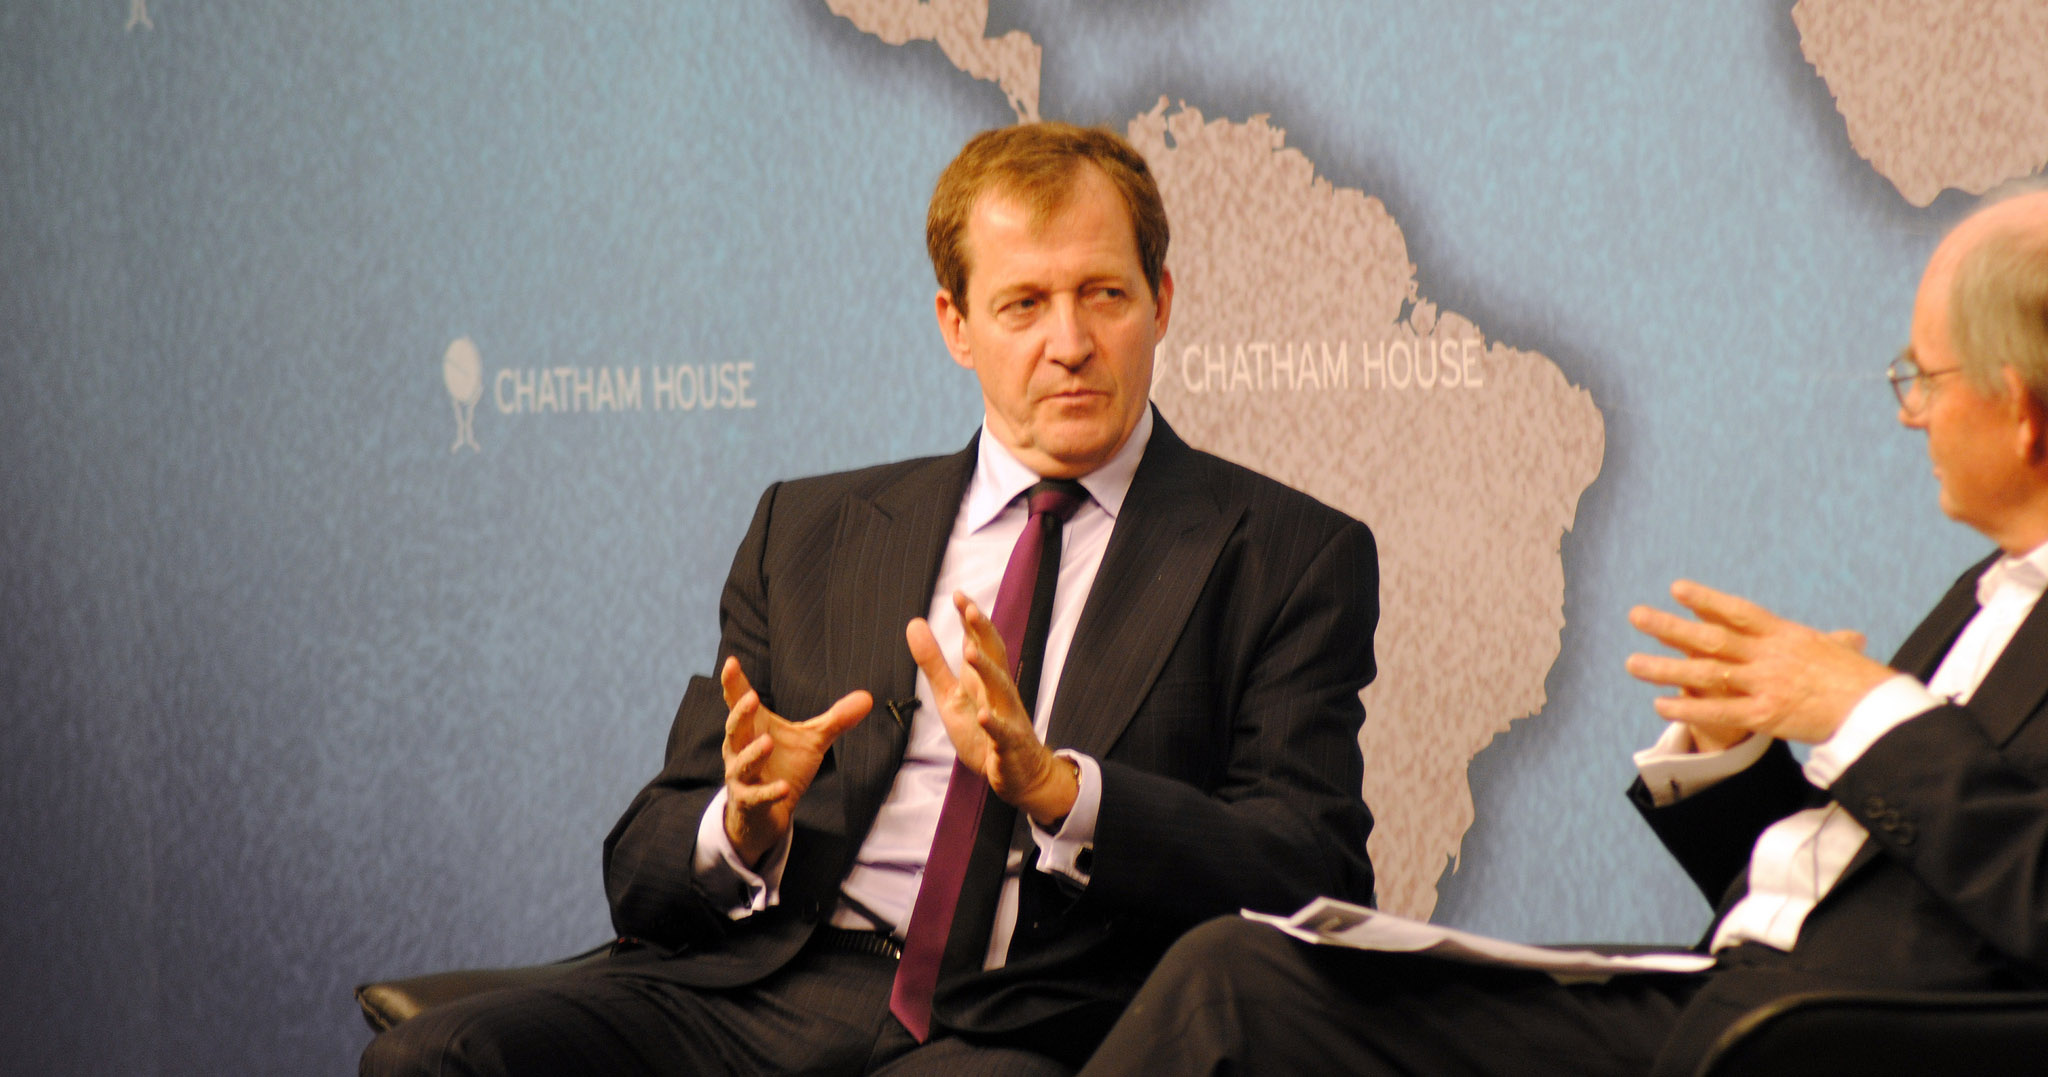 Alastair Campbell, Journalist; Director of Communications and Strategy, Number 10 (1997-2003) speaking to former MP Chris Mullin (right) at the Chatham house event E-Leadership: Political Communication in a Digital World, 17 October 2012